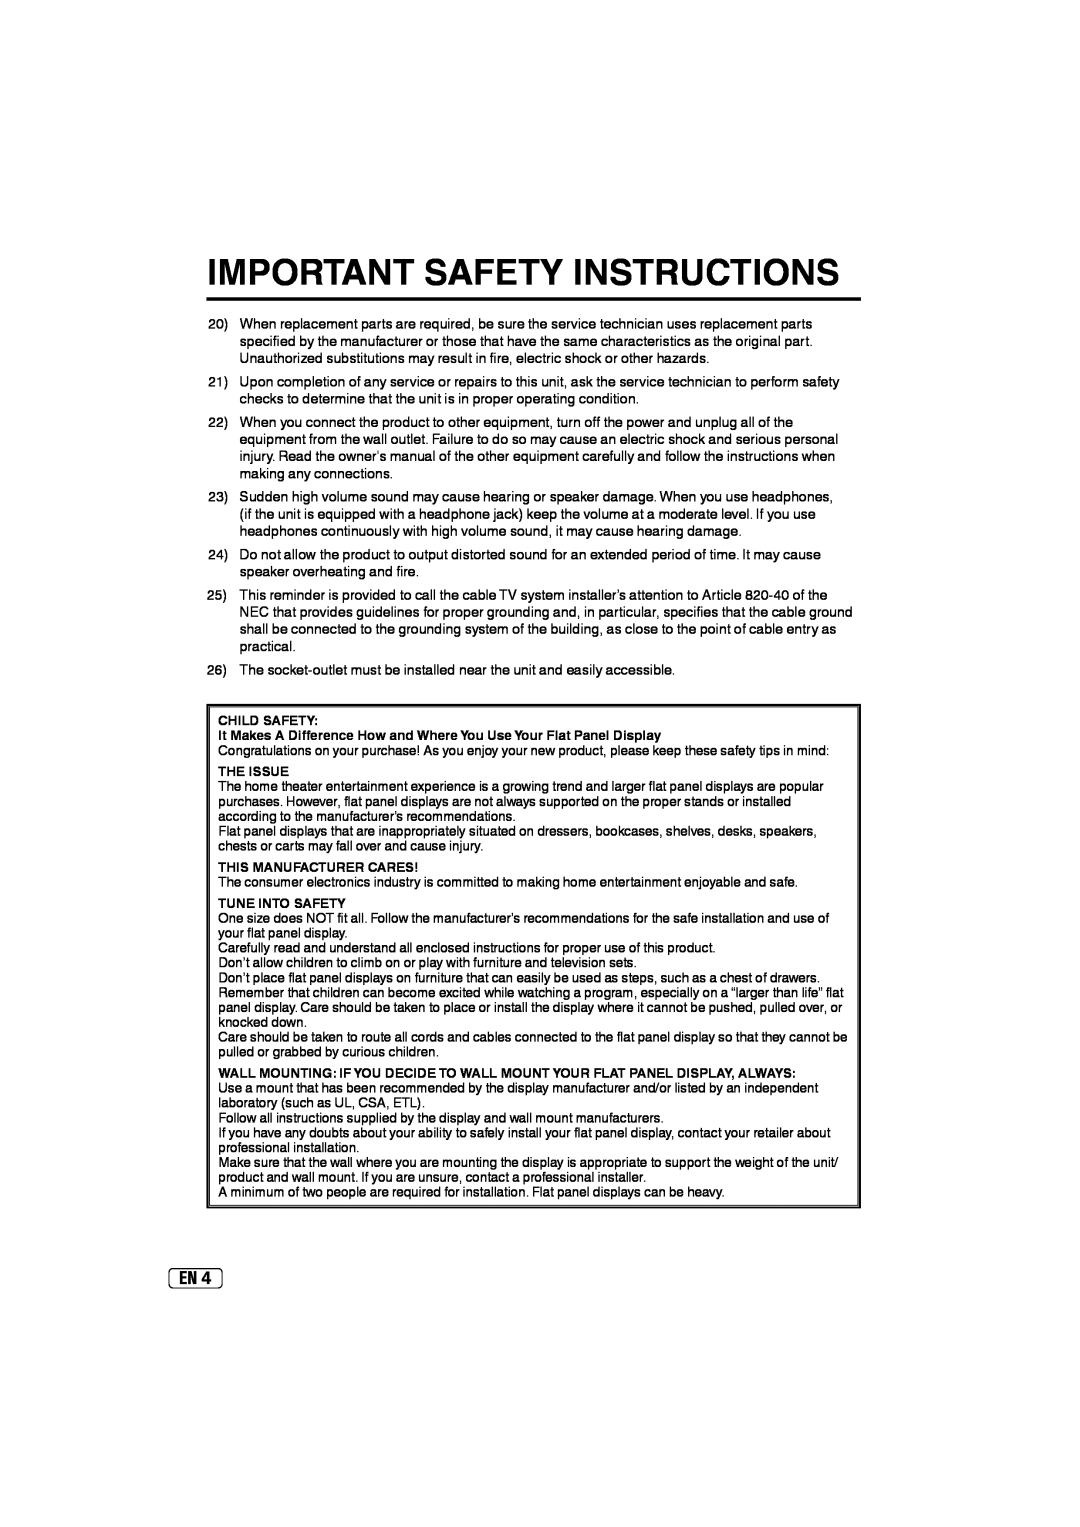 Sansui SLED2237 Important Safety Instructions, Child Safety, The Issue, This Manufacturer Cares, Tune Into Safety 